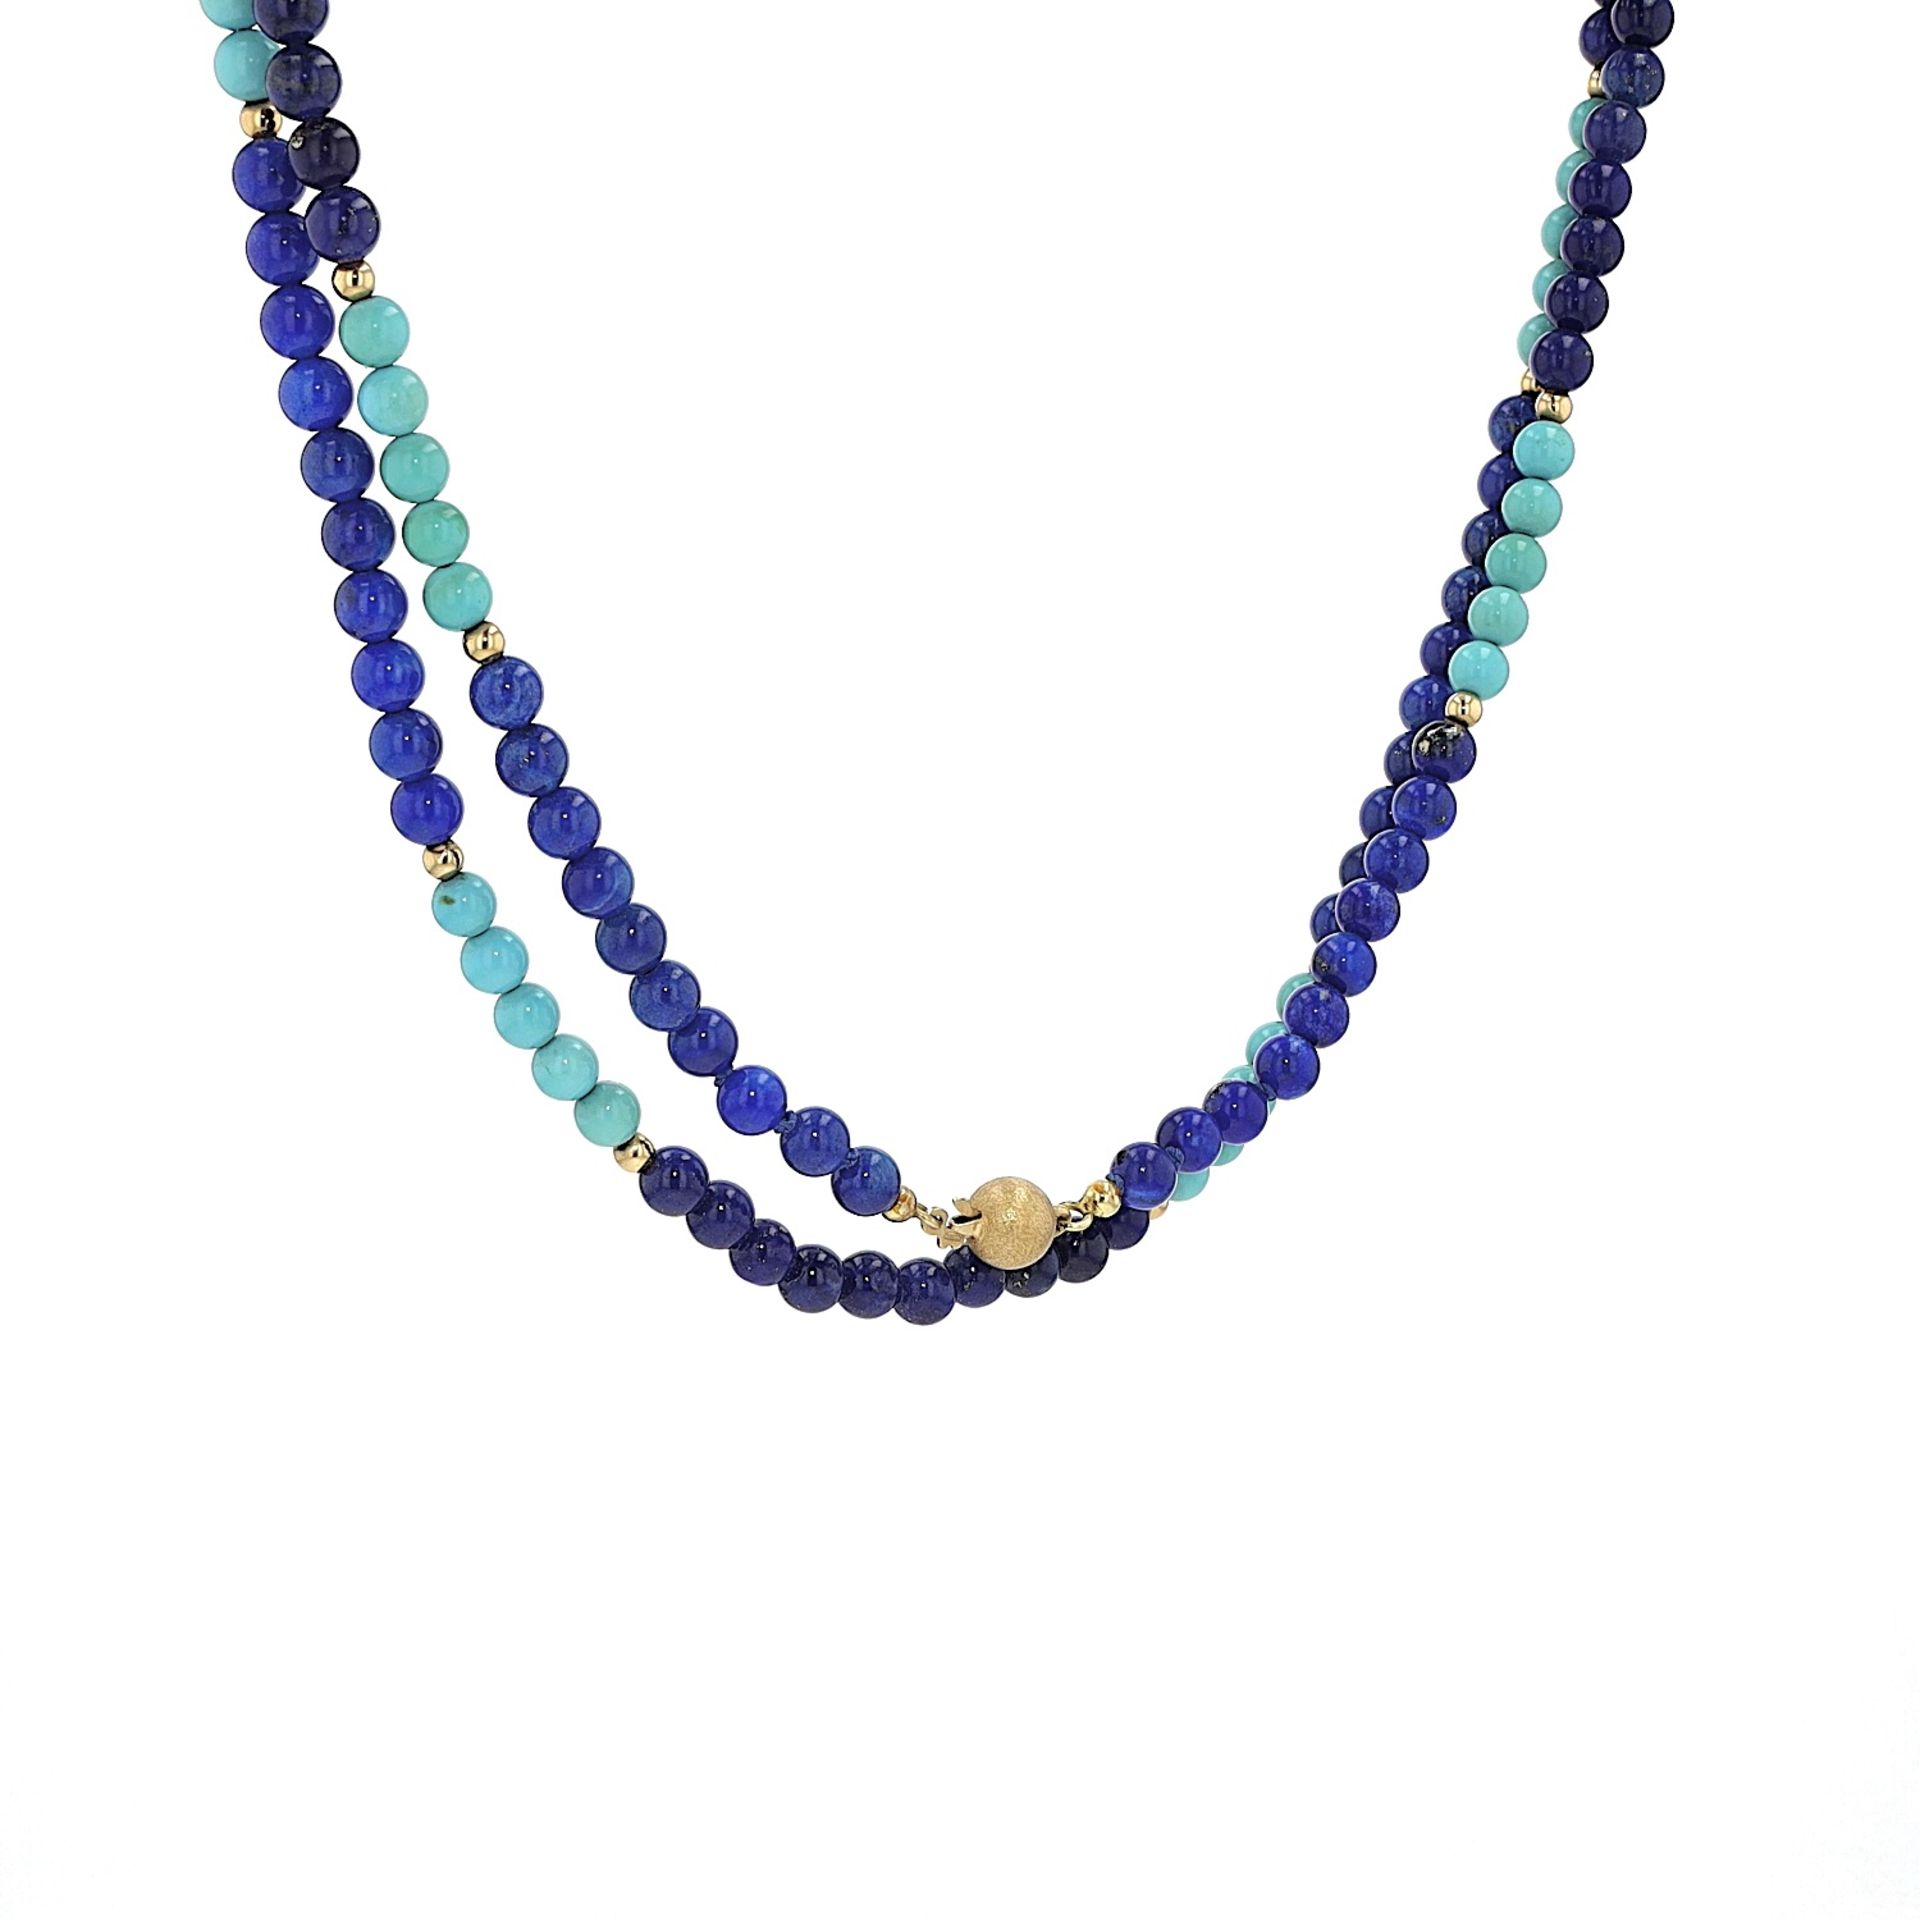 Necklace with gold beads and gemstone - Image 3 of 4